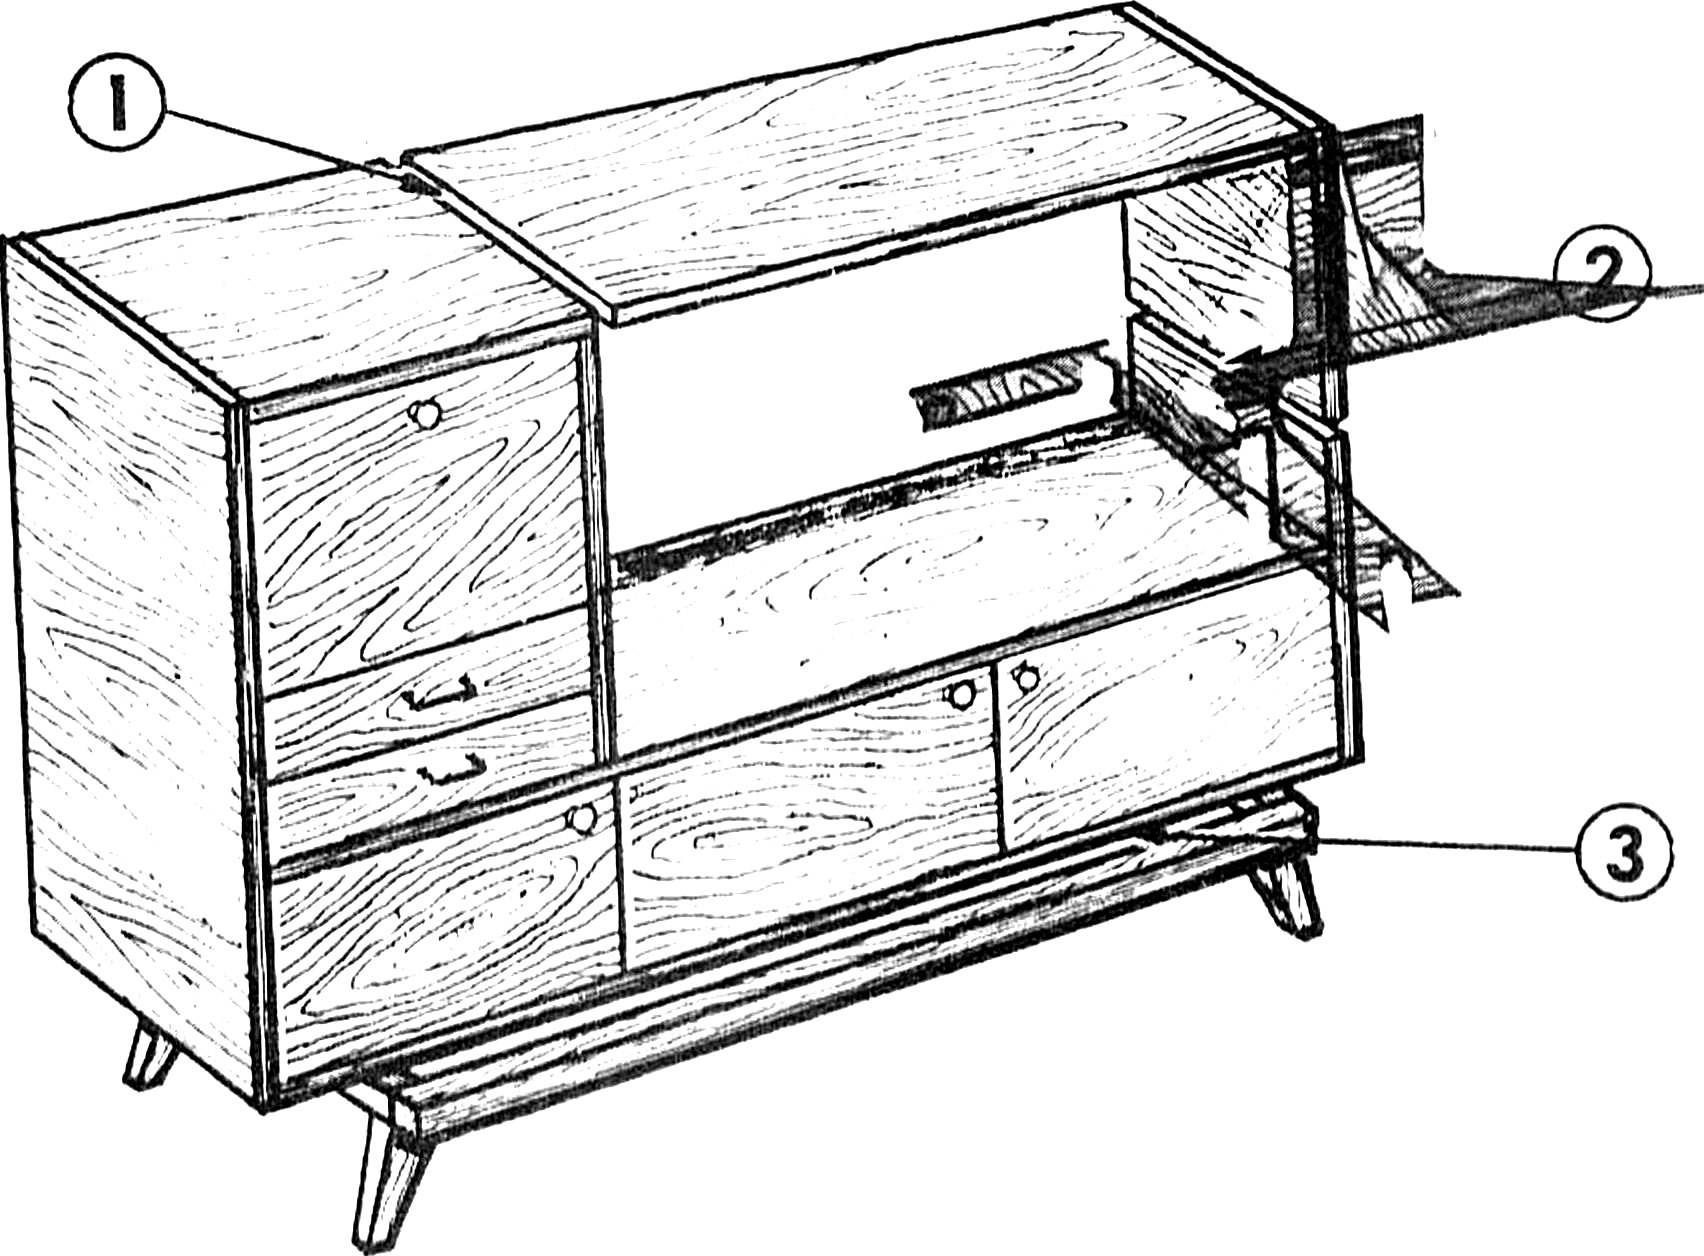 Fig. 1. Turning a cupboard into the Cabinet for the hall begins with the dismantling of the top and side panels (cut on lines 1 and 2) and base (separate from bottom surface 3).